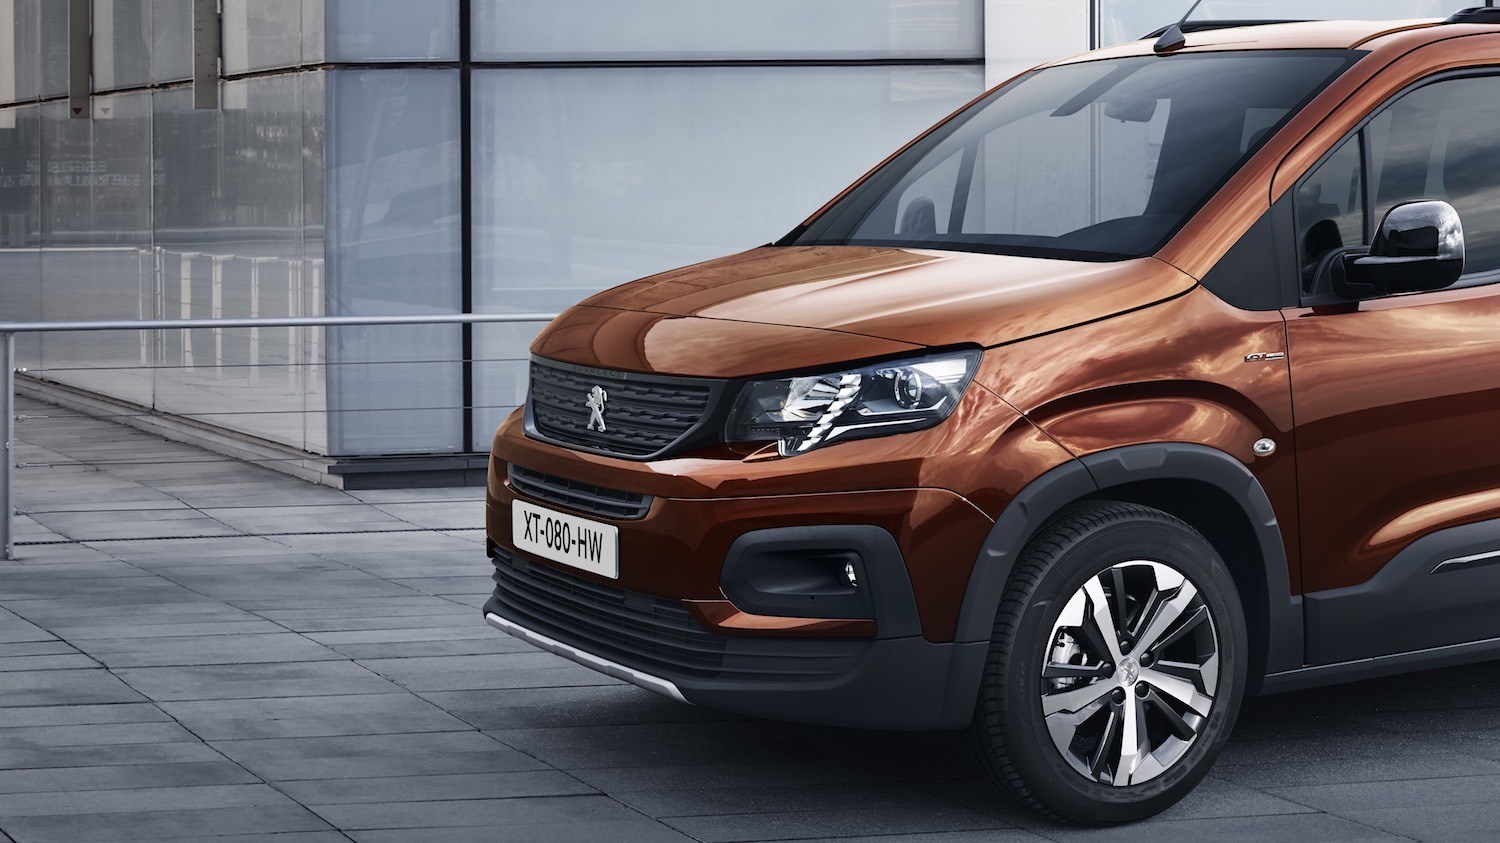 Tim Barnes-Clay reviews the Peugeot Rifter from the European Launch 5